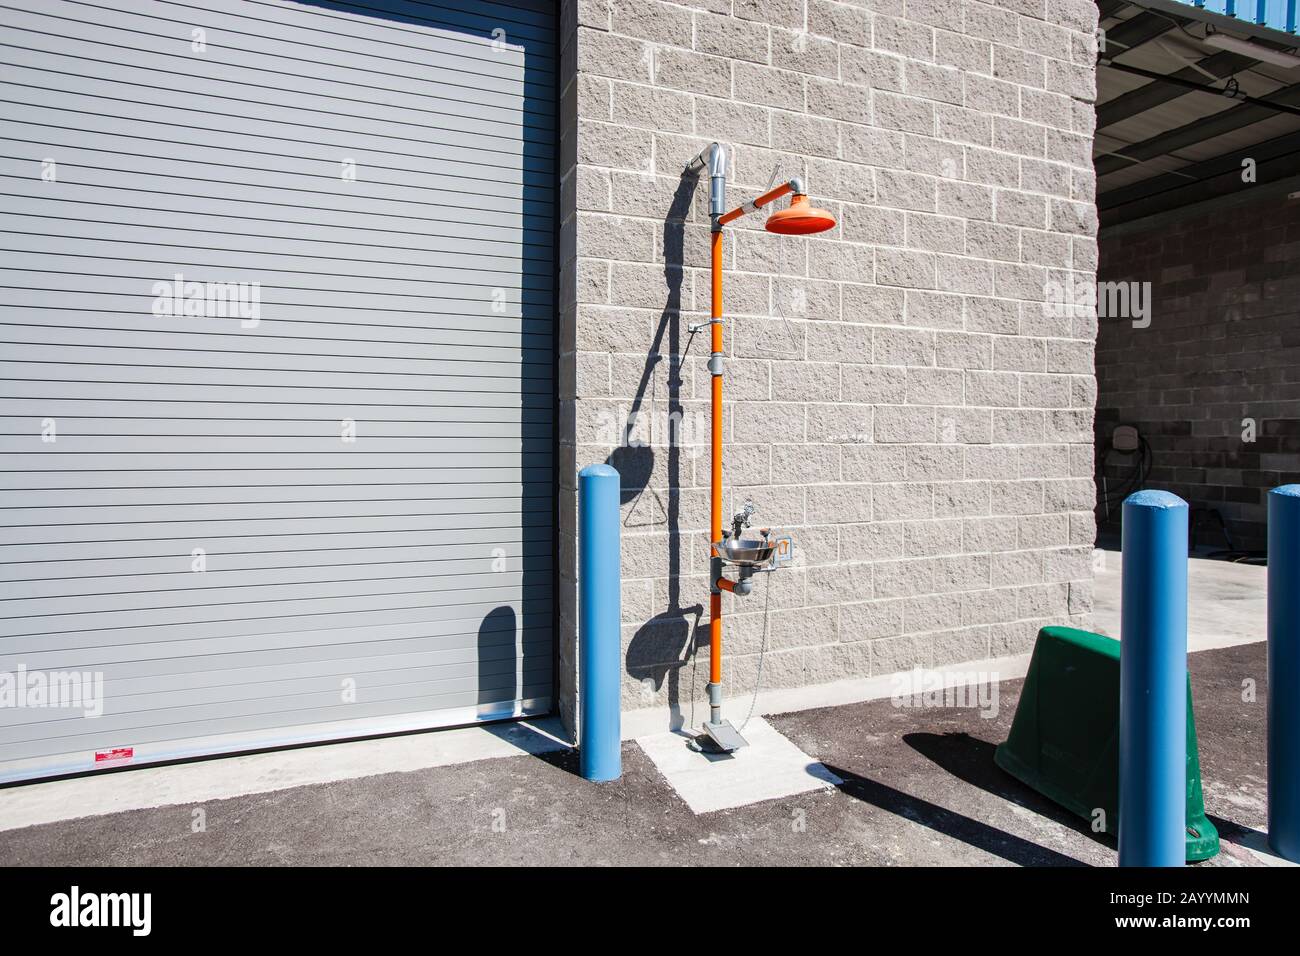 A free standing industrial safety shower with eye wash station stands outside a warehouse facility Stock Photo